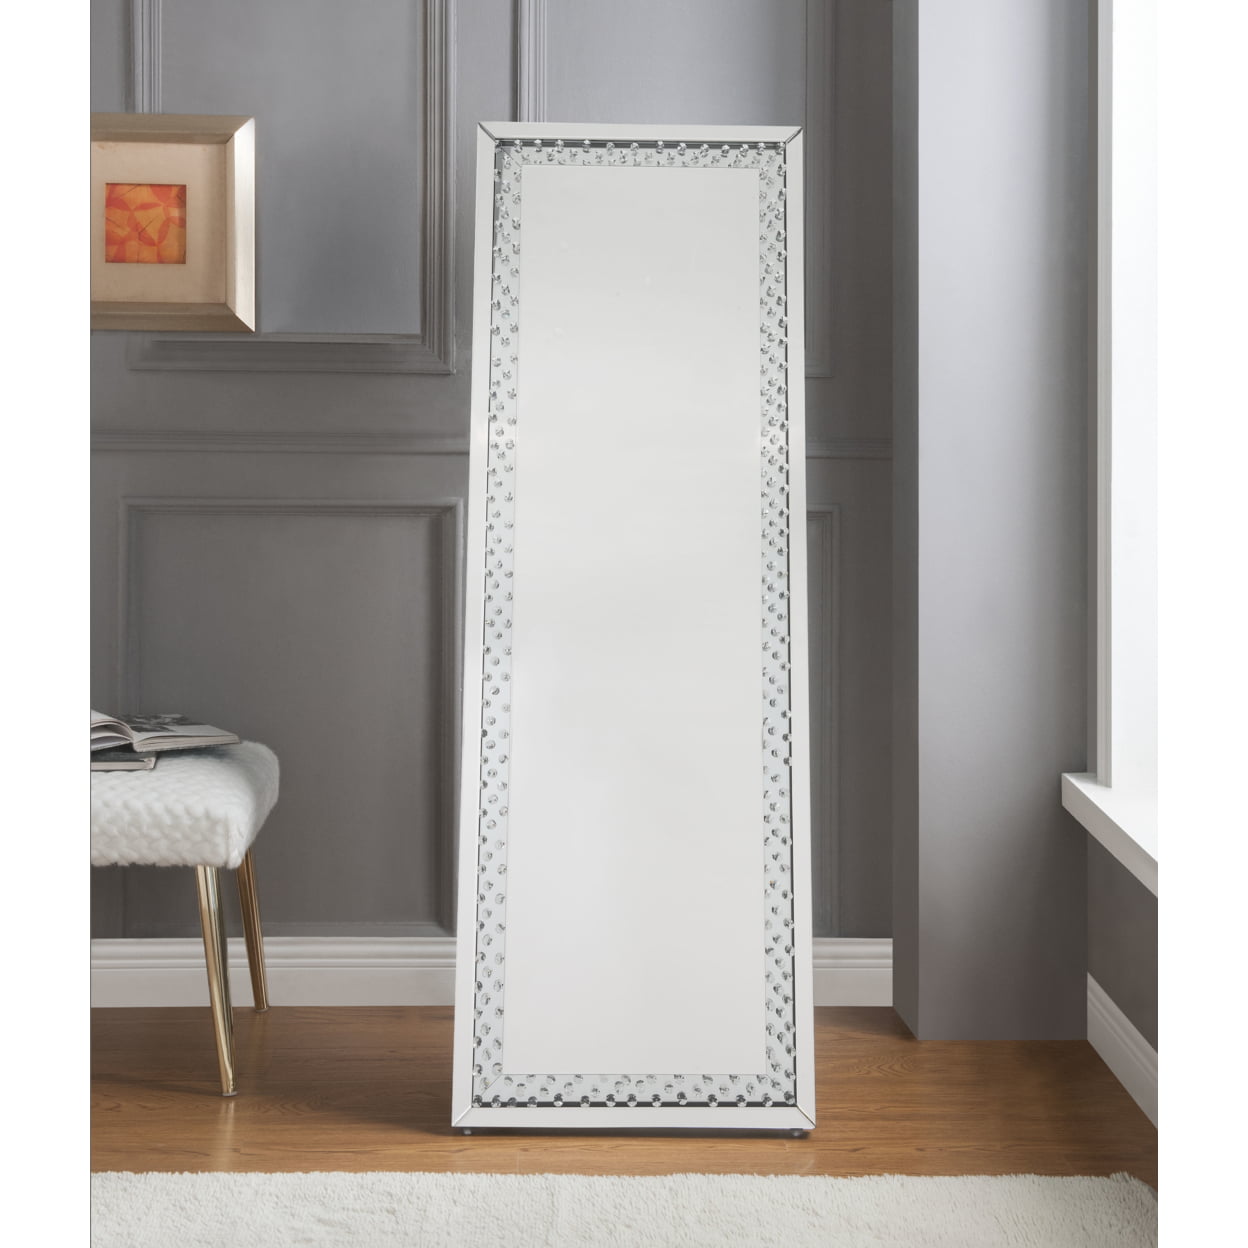 Picture of ACME 97025 Nysa Accent Floor Mirror - Mirrored & Faux Crystals